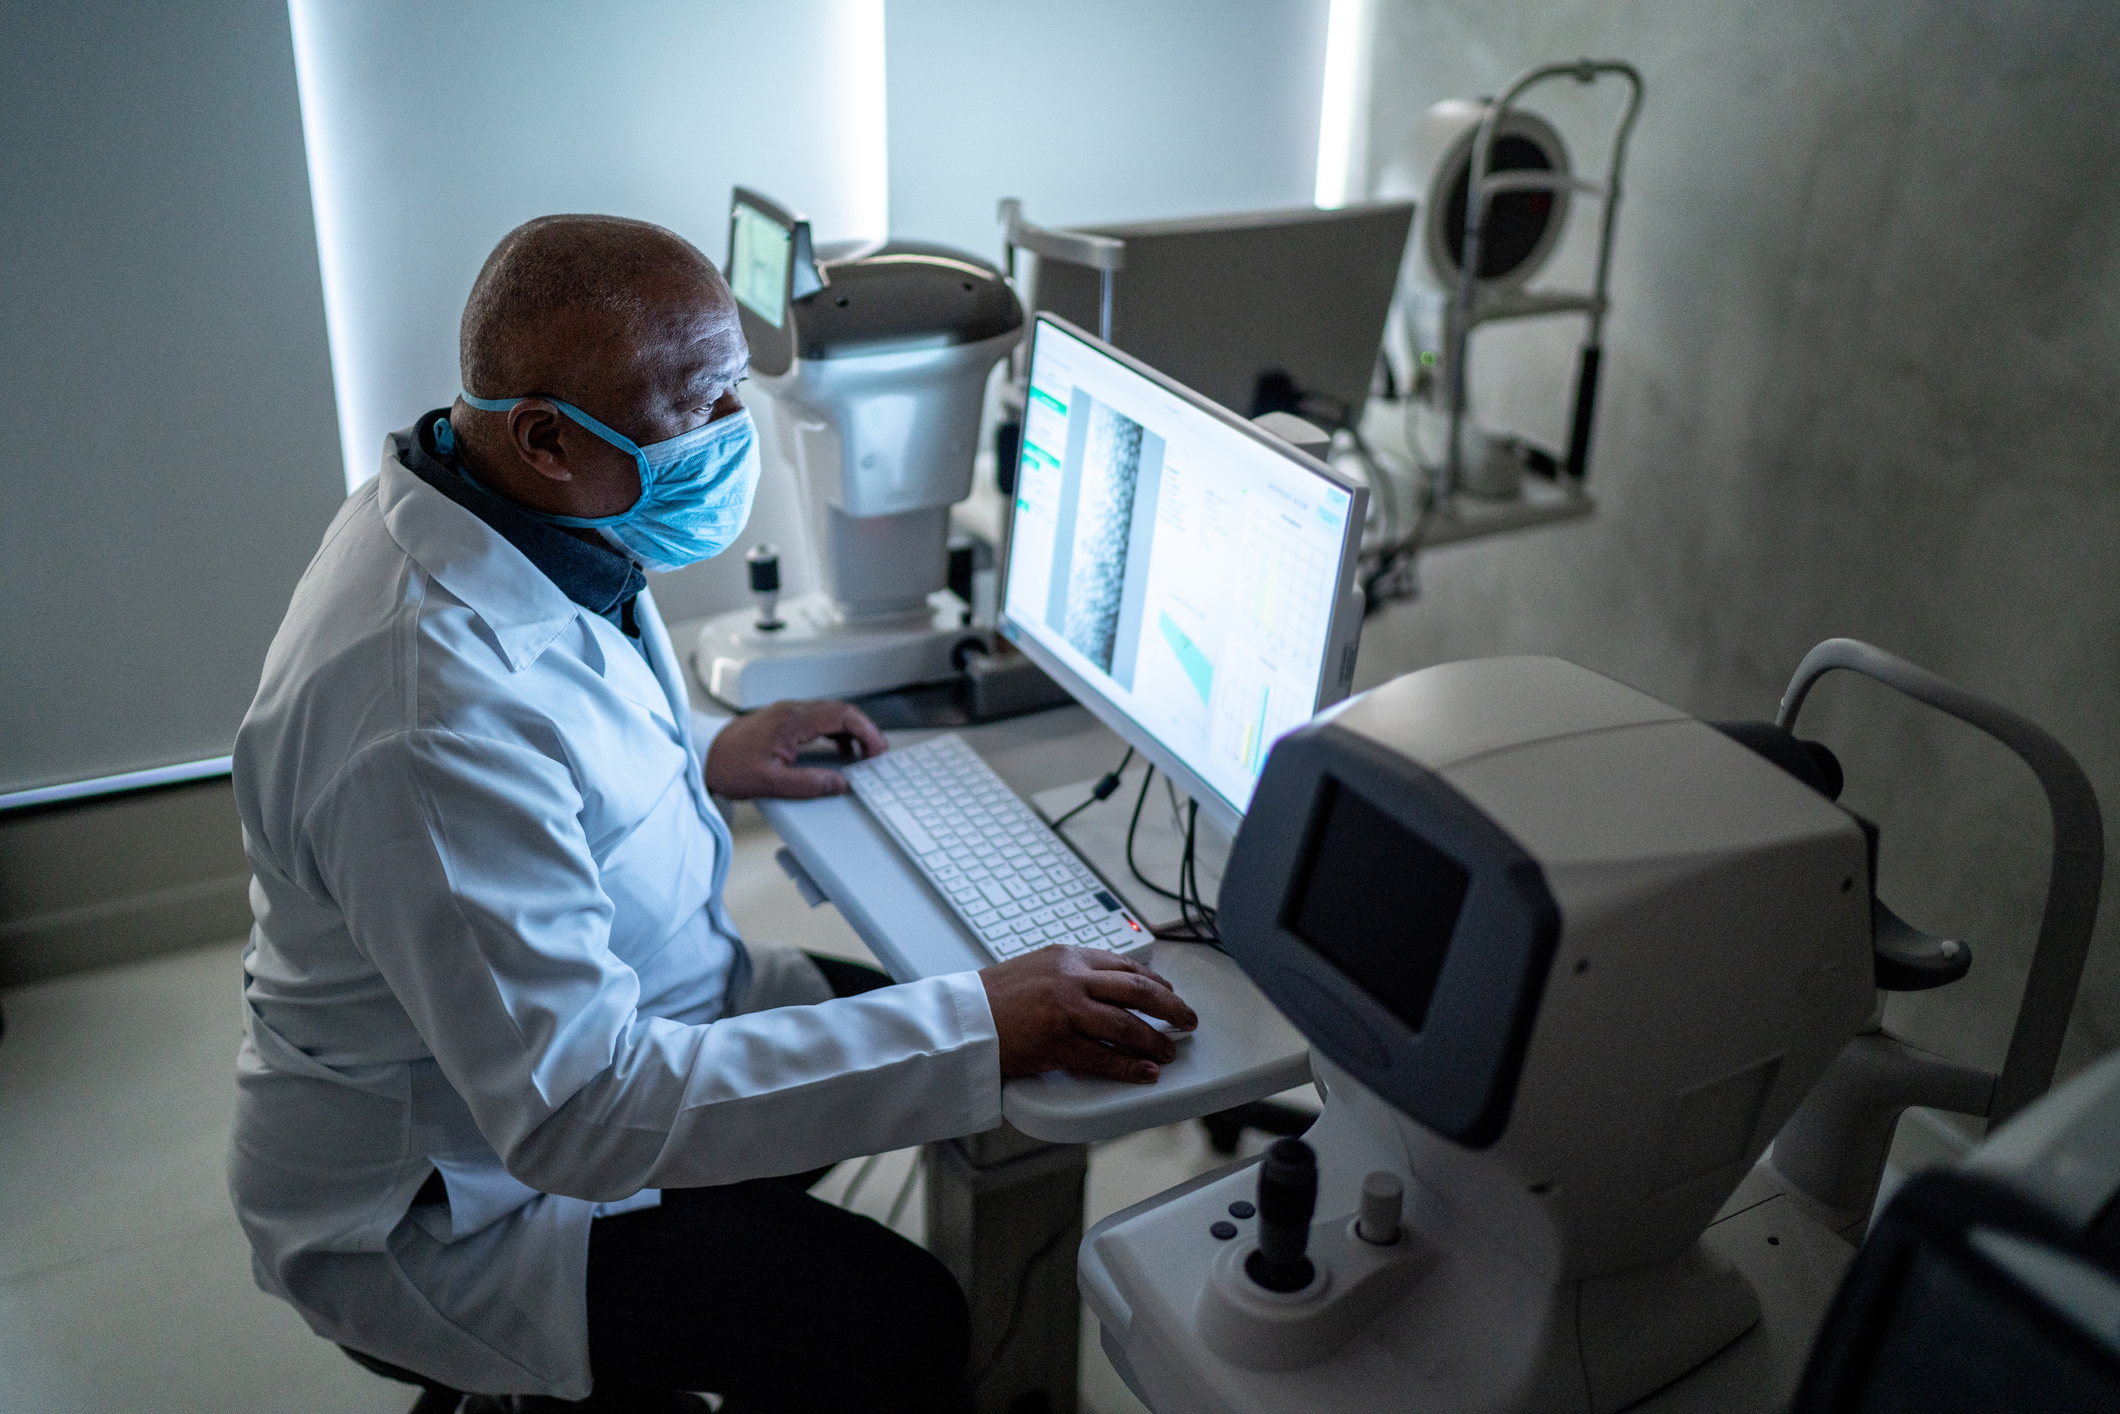 Doctor, wearing a surgical mask, analyzing the exam's results on the monitor